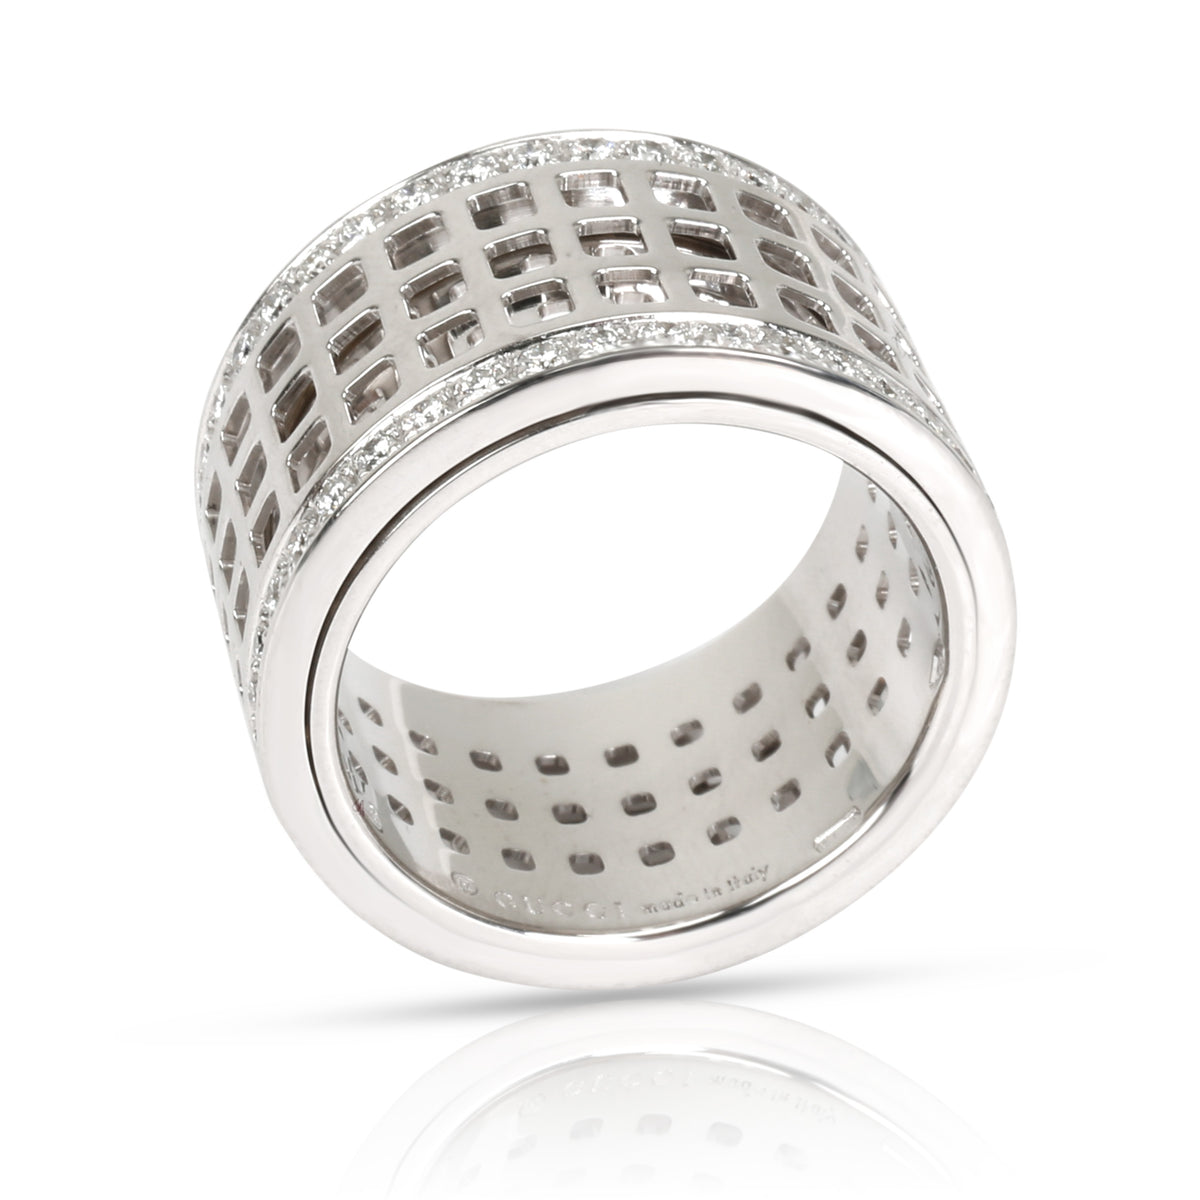 Gucci Diamond Spinning Ring in 18K White Gold (1.5 CTW)